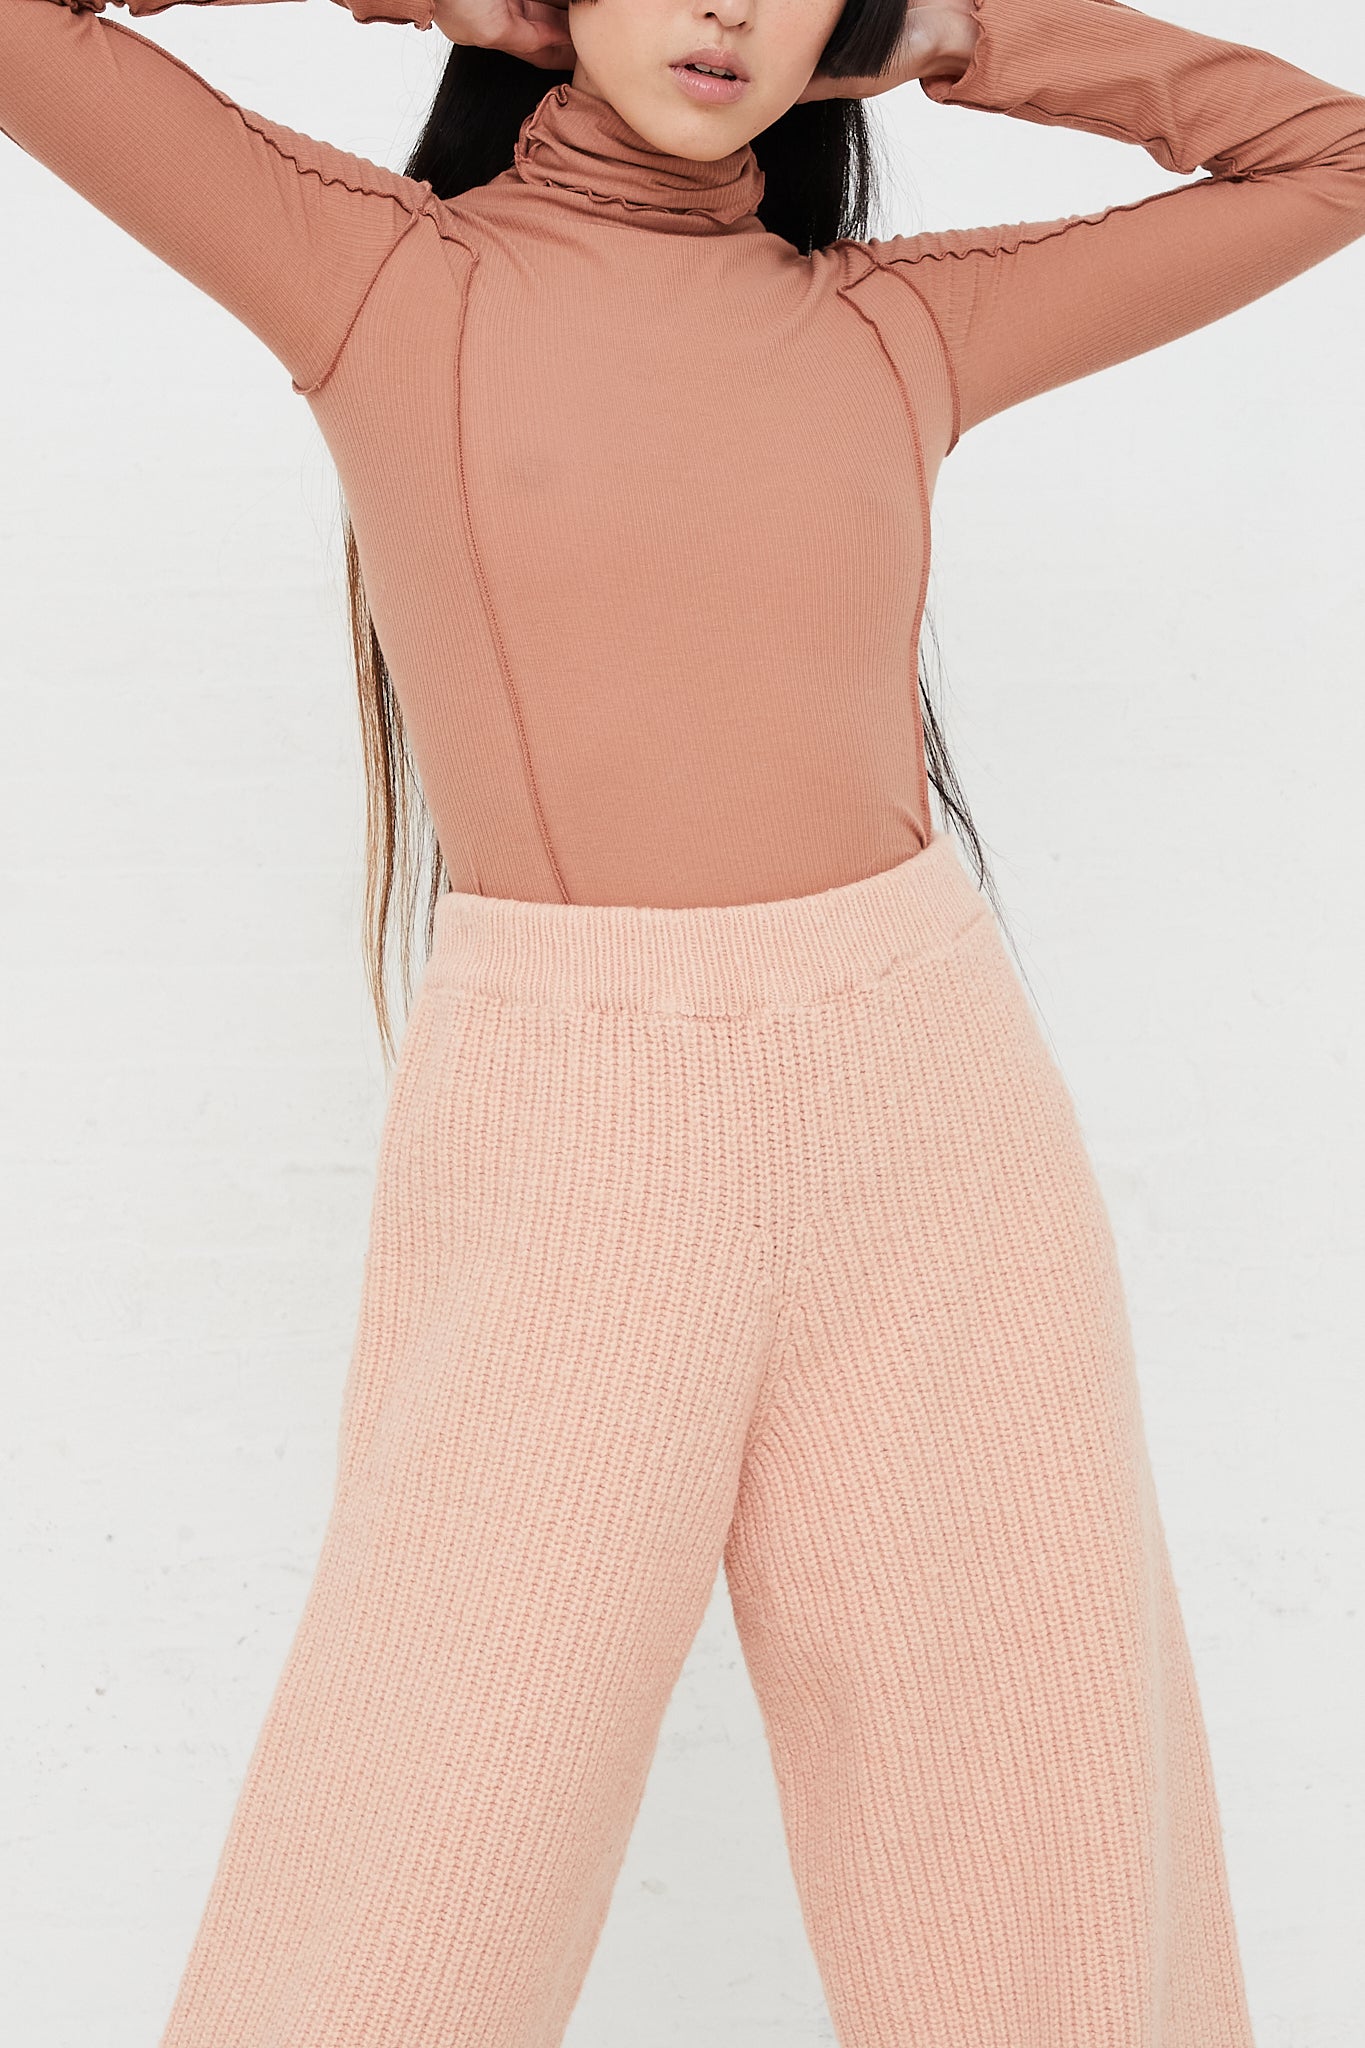 Mea Rib Knit Pant in Pink by Baserange for Oroboro Front Upclose